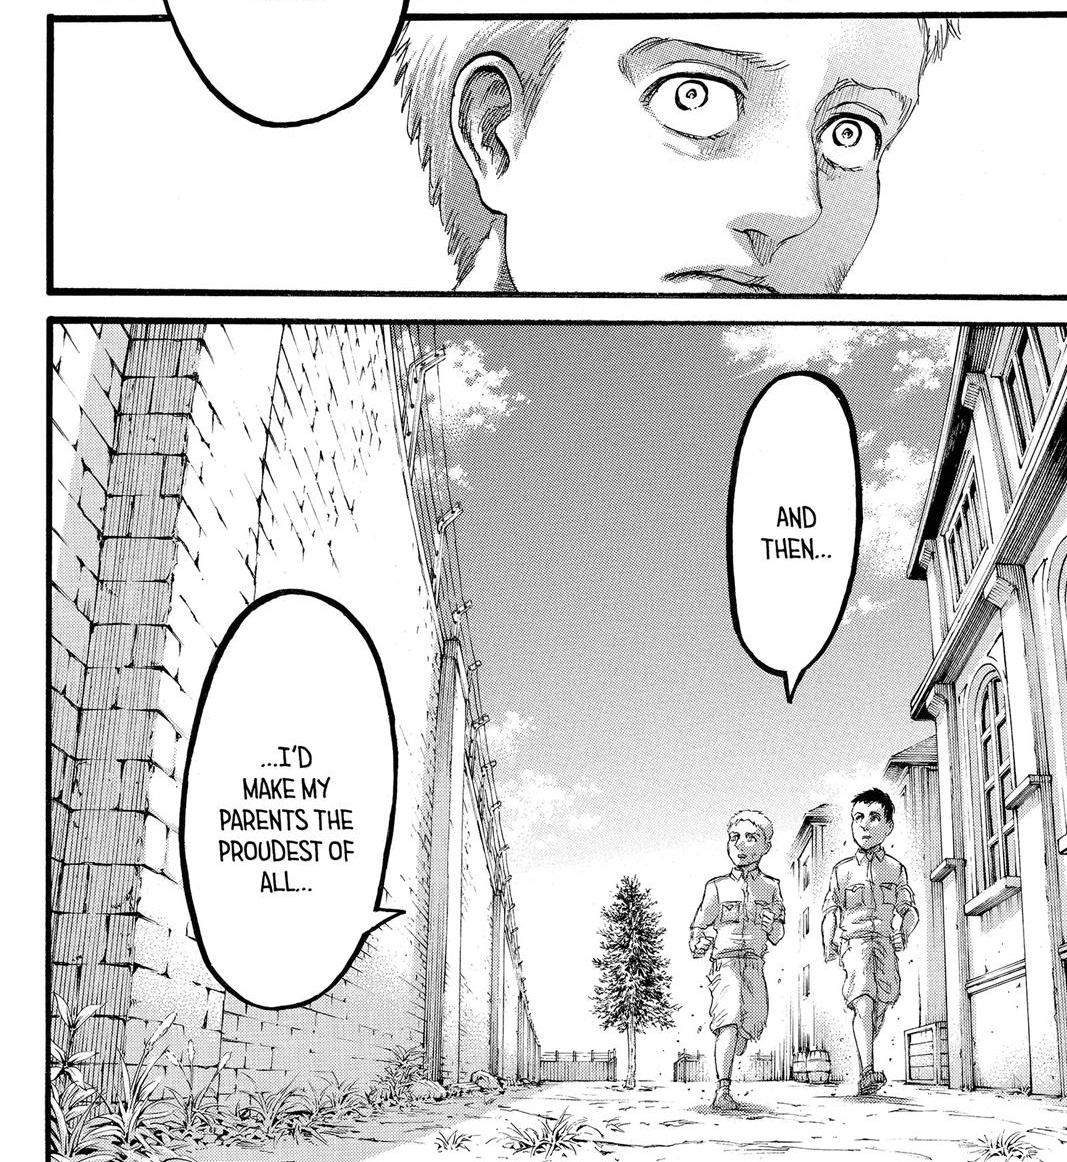 And his own character arc we get to see a glimpse of a young and bored Eren looking at the sky saying “Ah.. I wish something would happen..”And then Armin “There you are, Eren!!” knowing what happens after changes everything